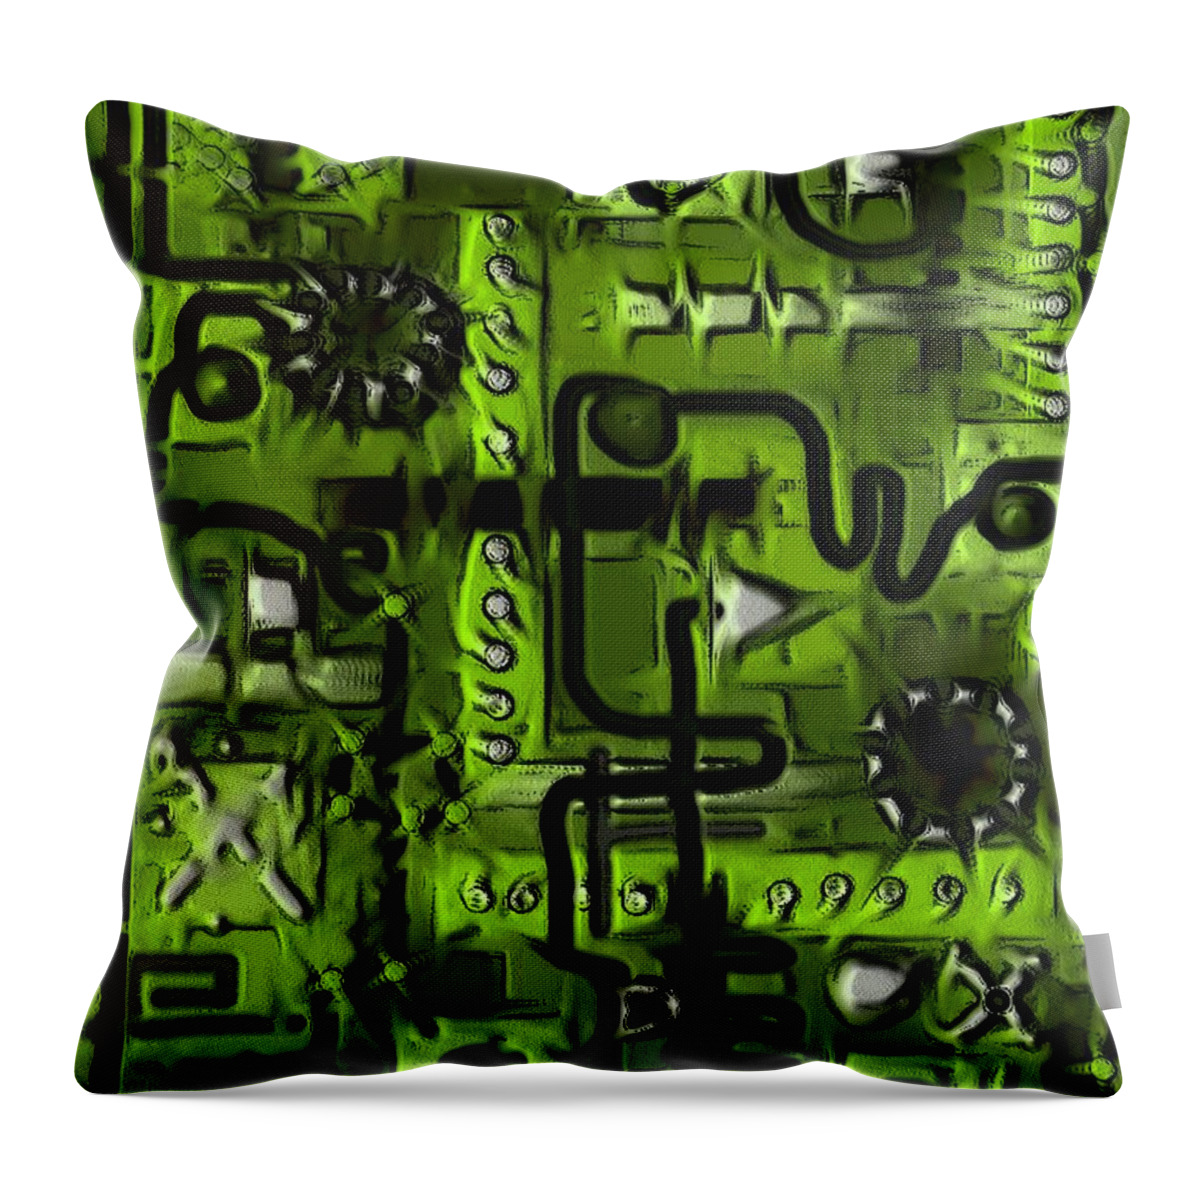 Circuit Board Throw Pillow featuring the digital art Circuit Board Abstract in Green by Barbara St Jean